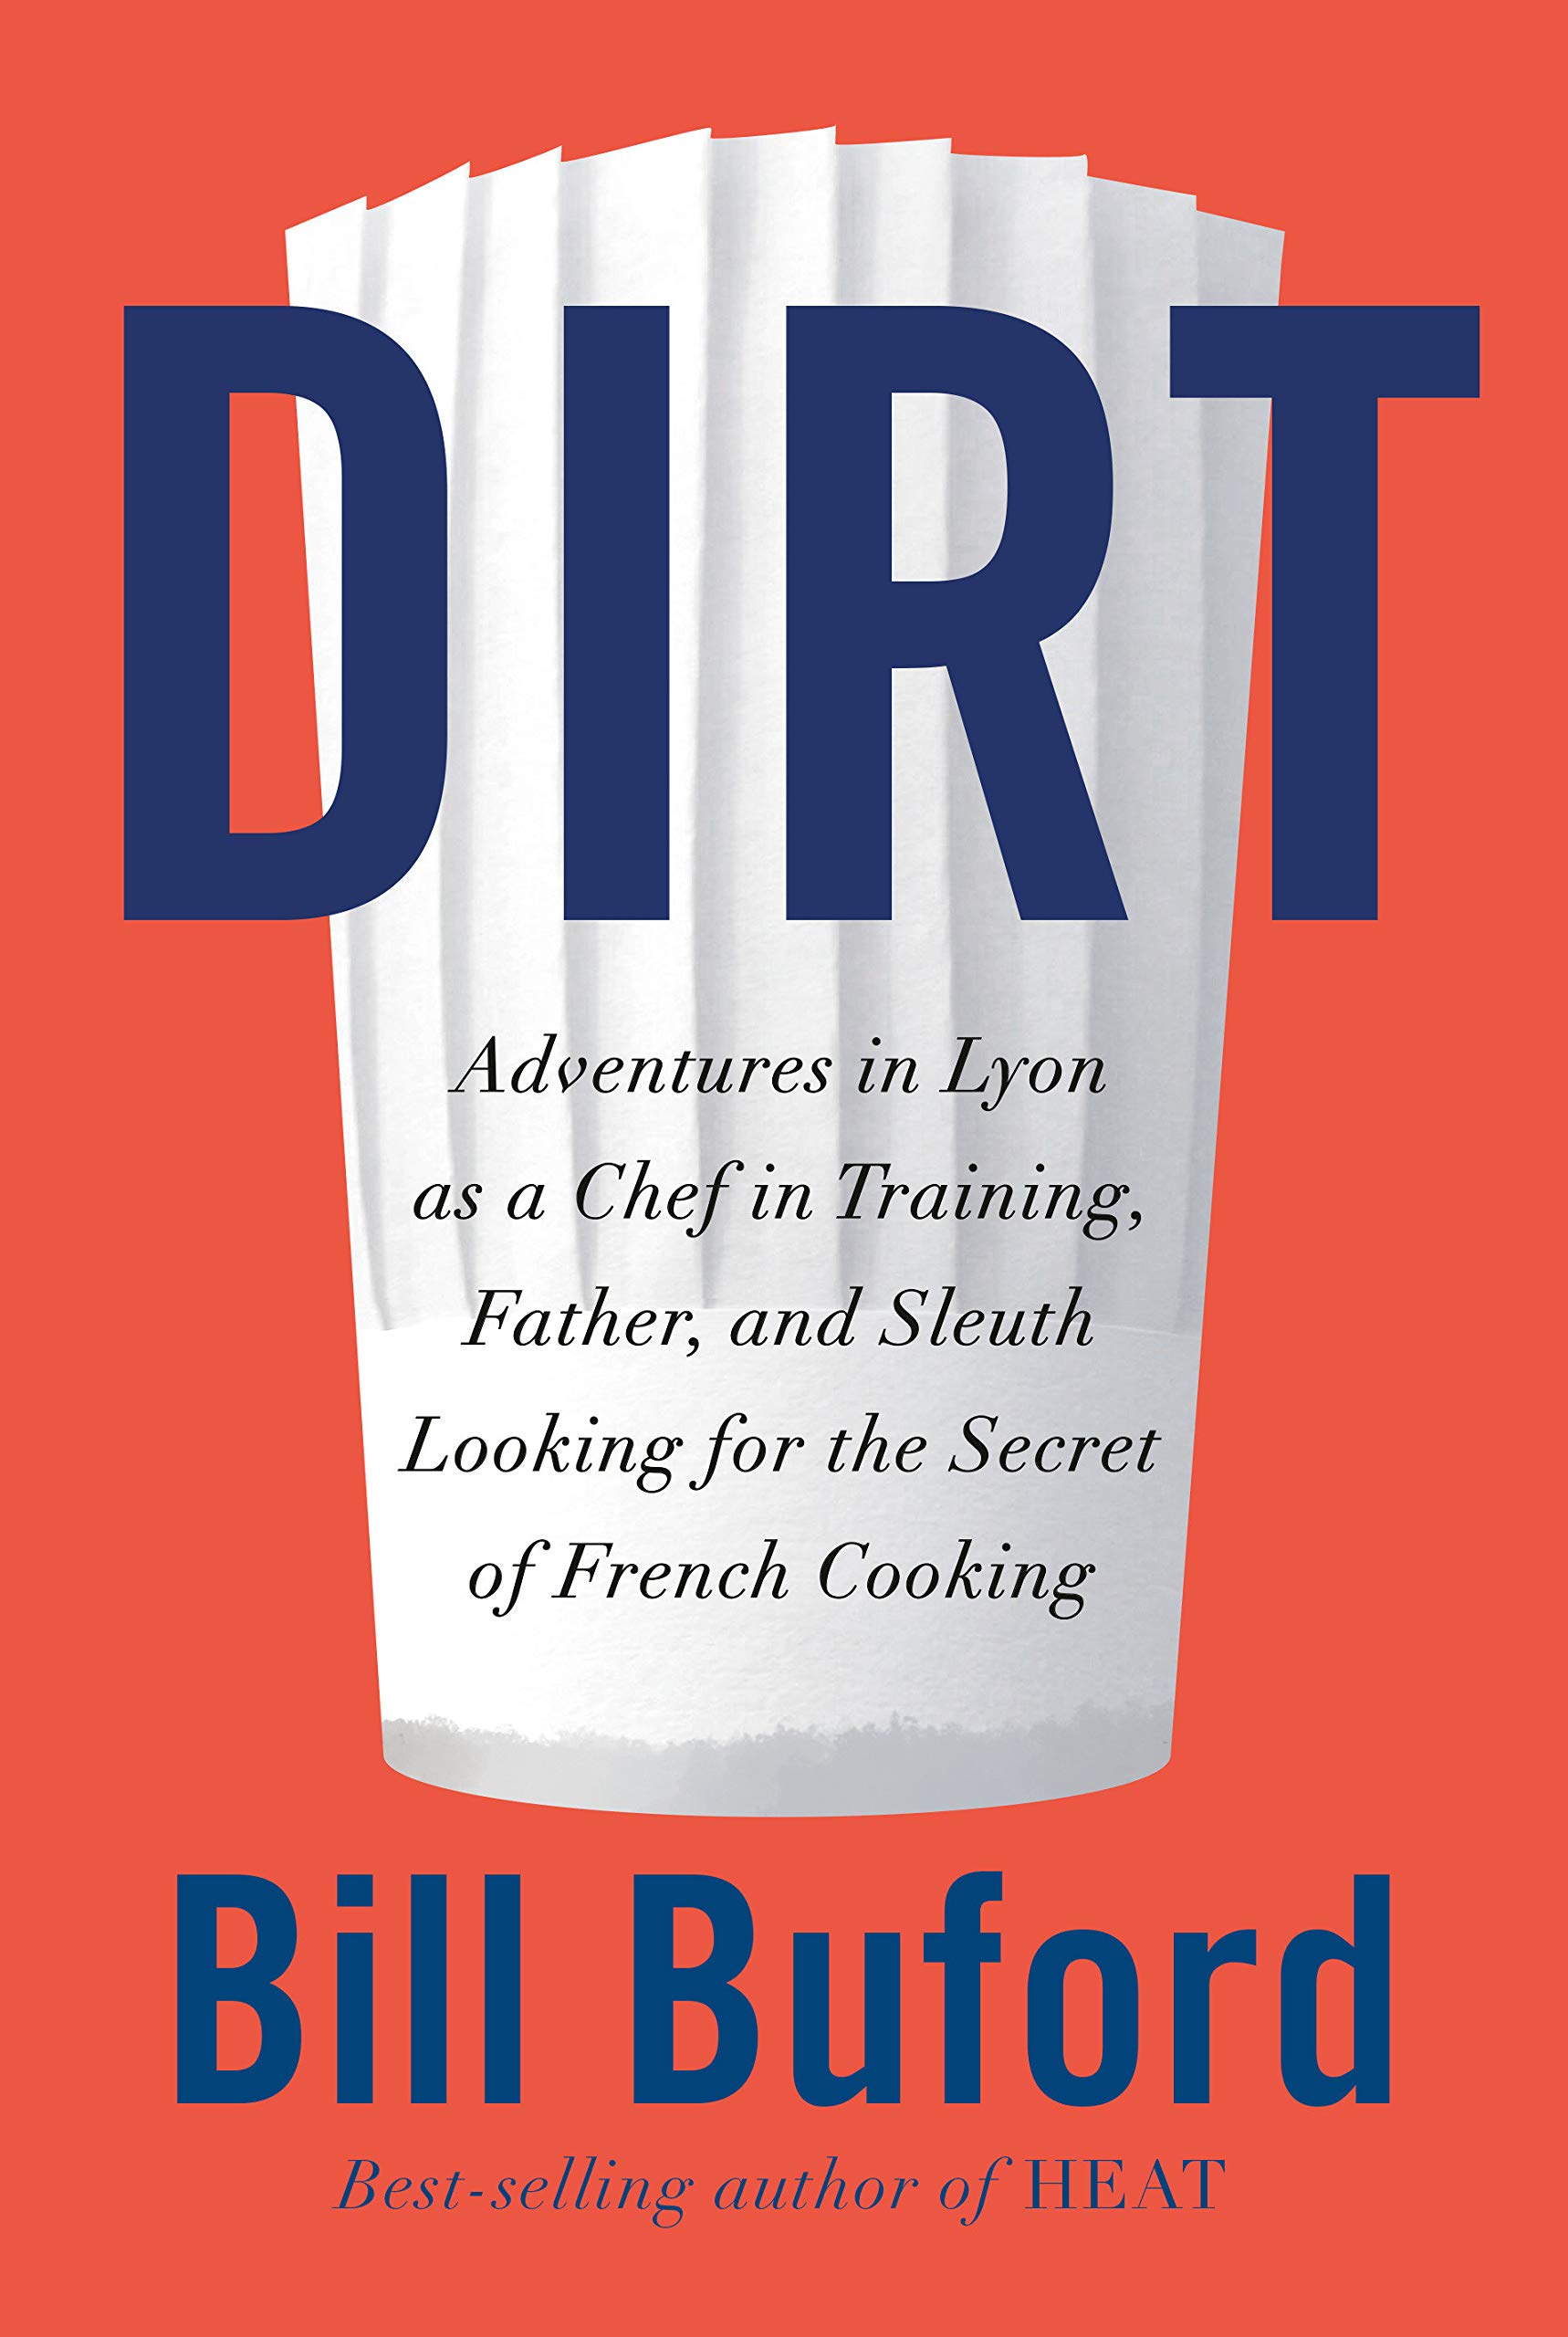 Image for "Dirt"